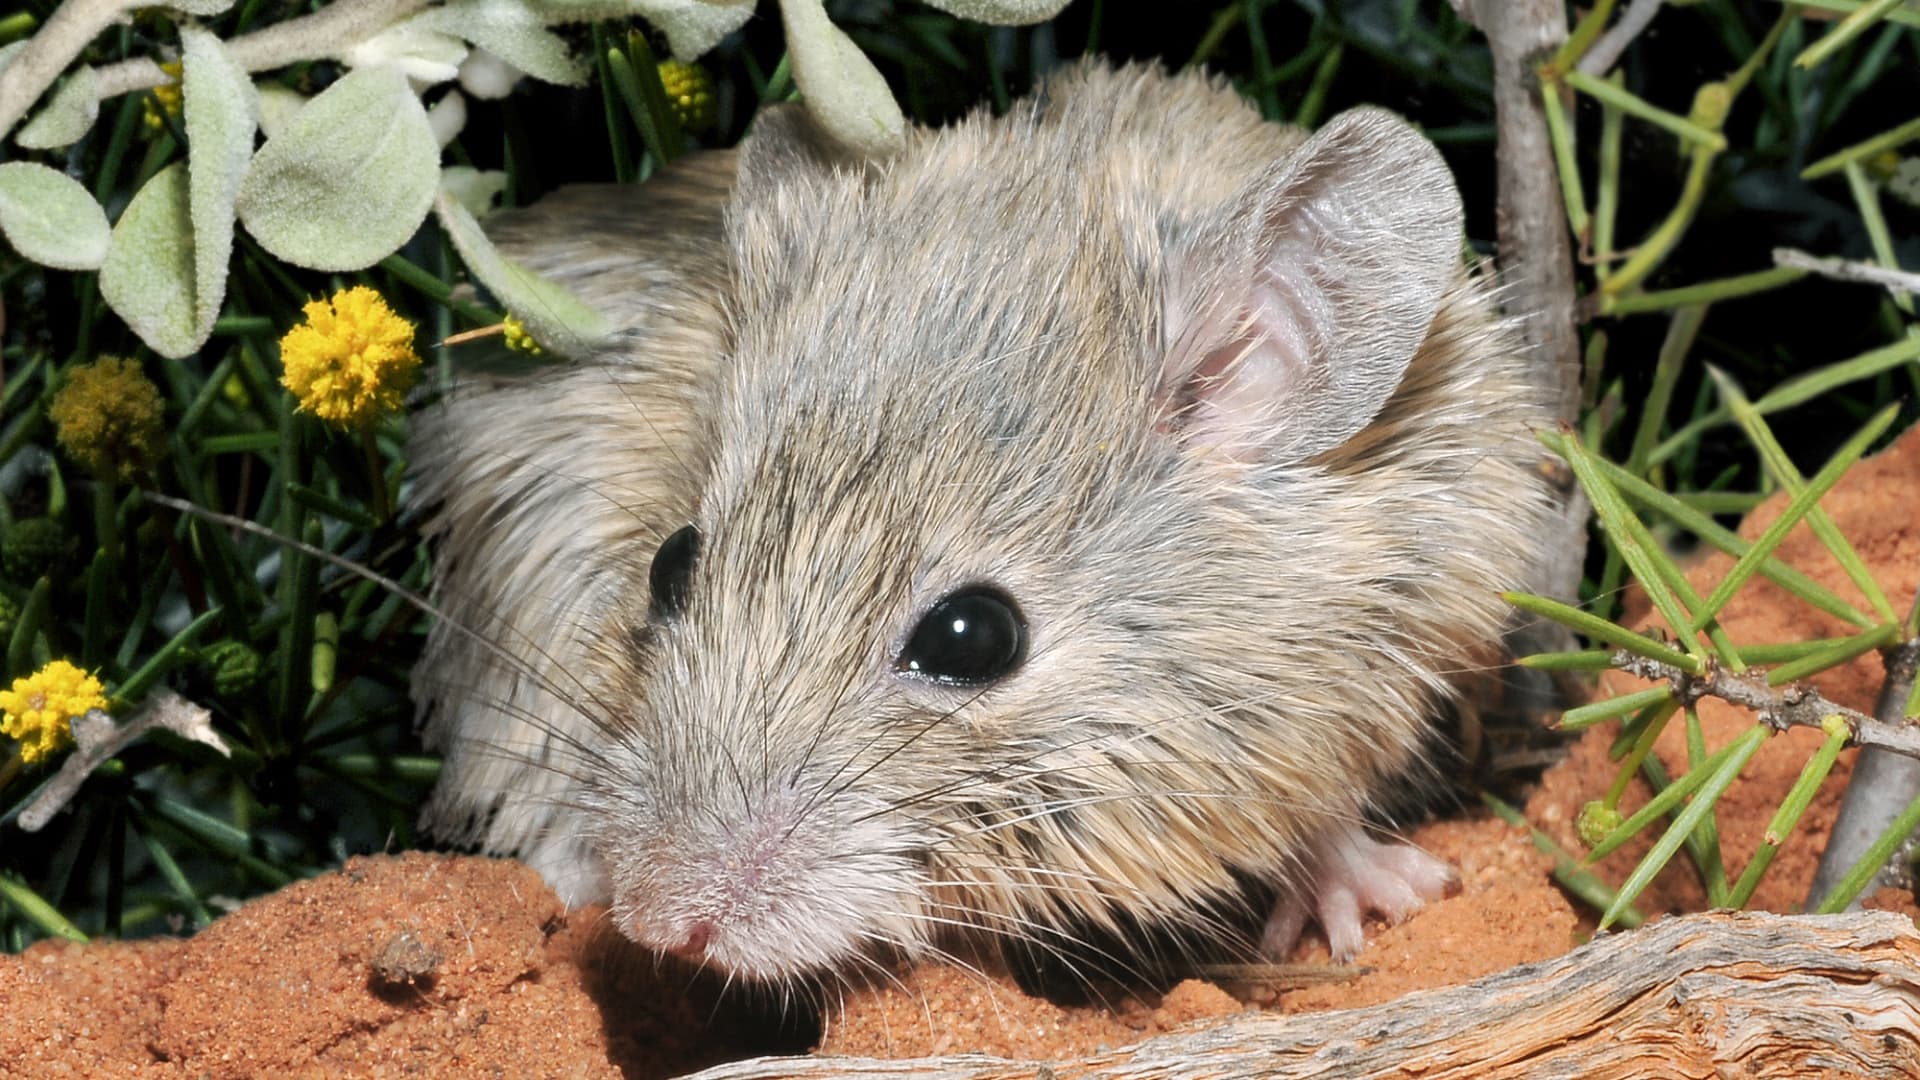 Biodiversity: the extinct mouse is still alive